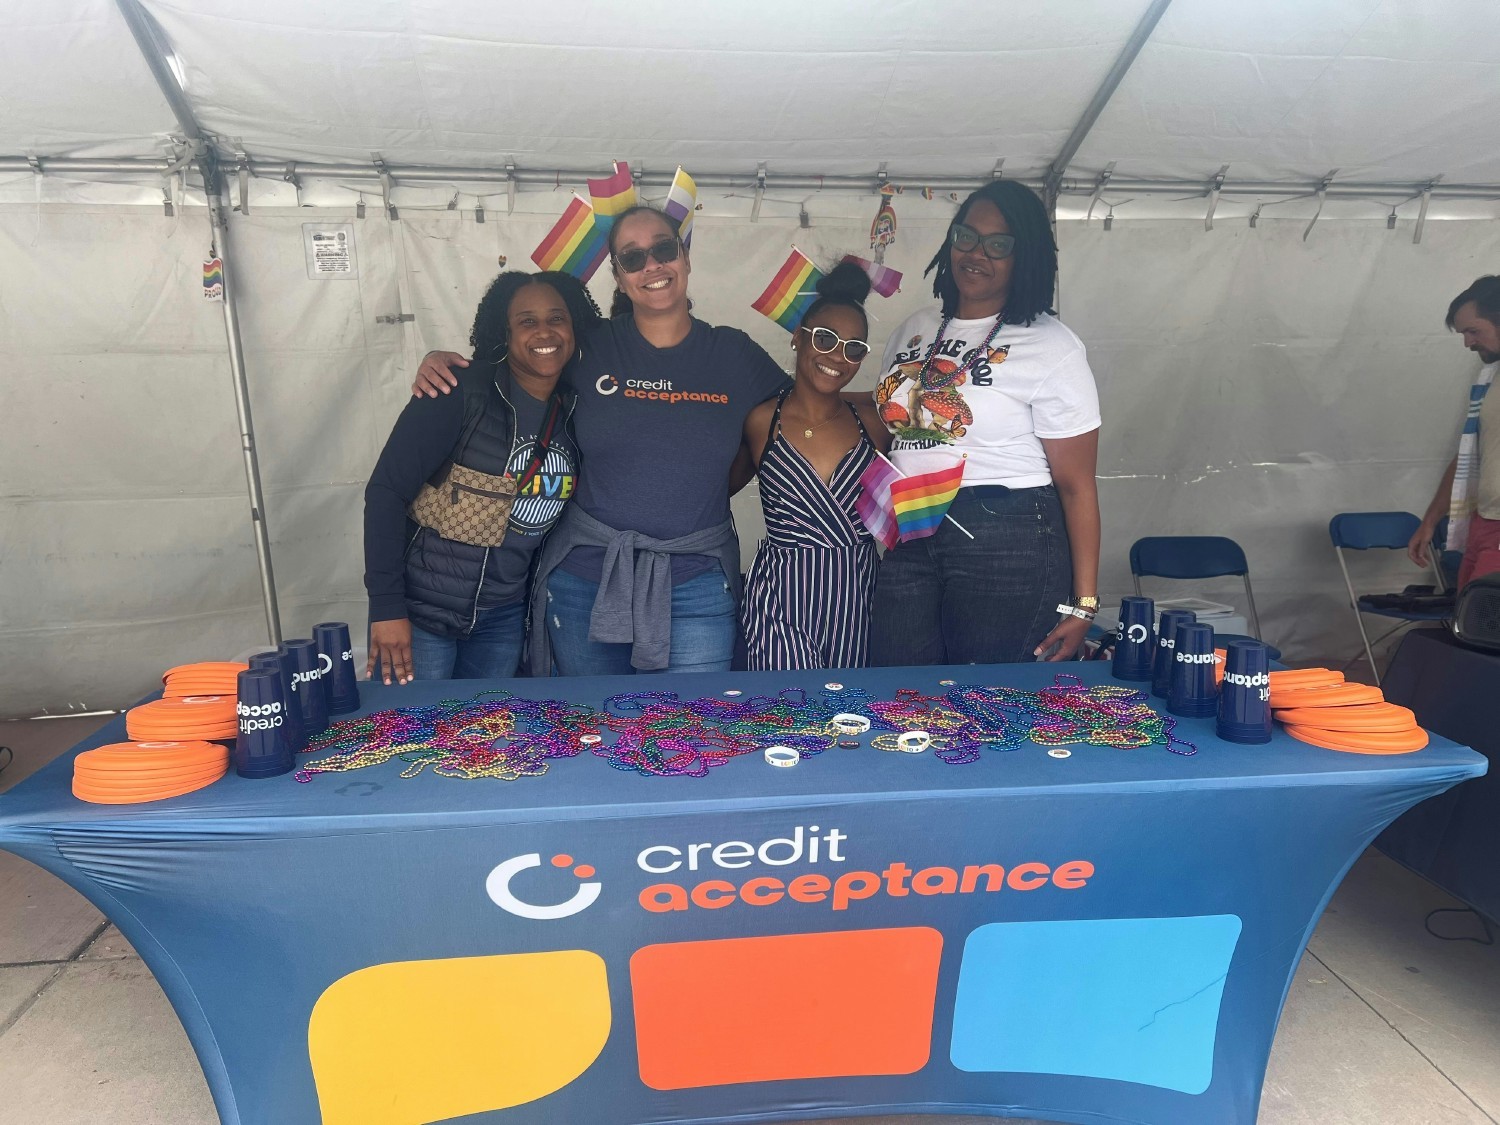 Supporting diversity and inclusion by volunteering at Motor City Pride.